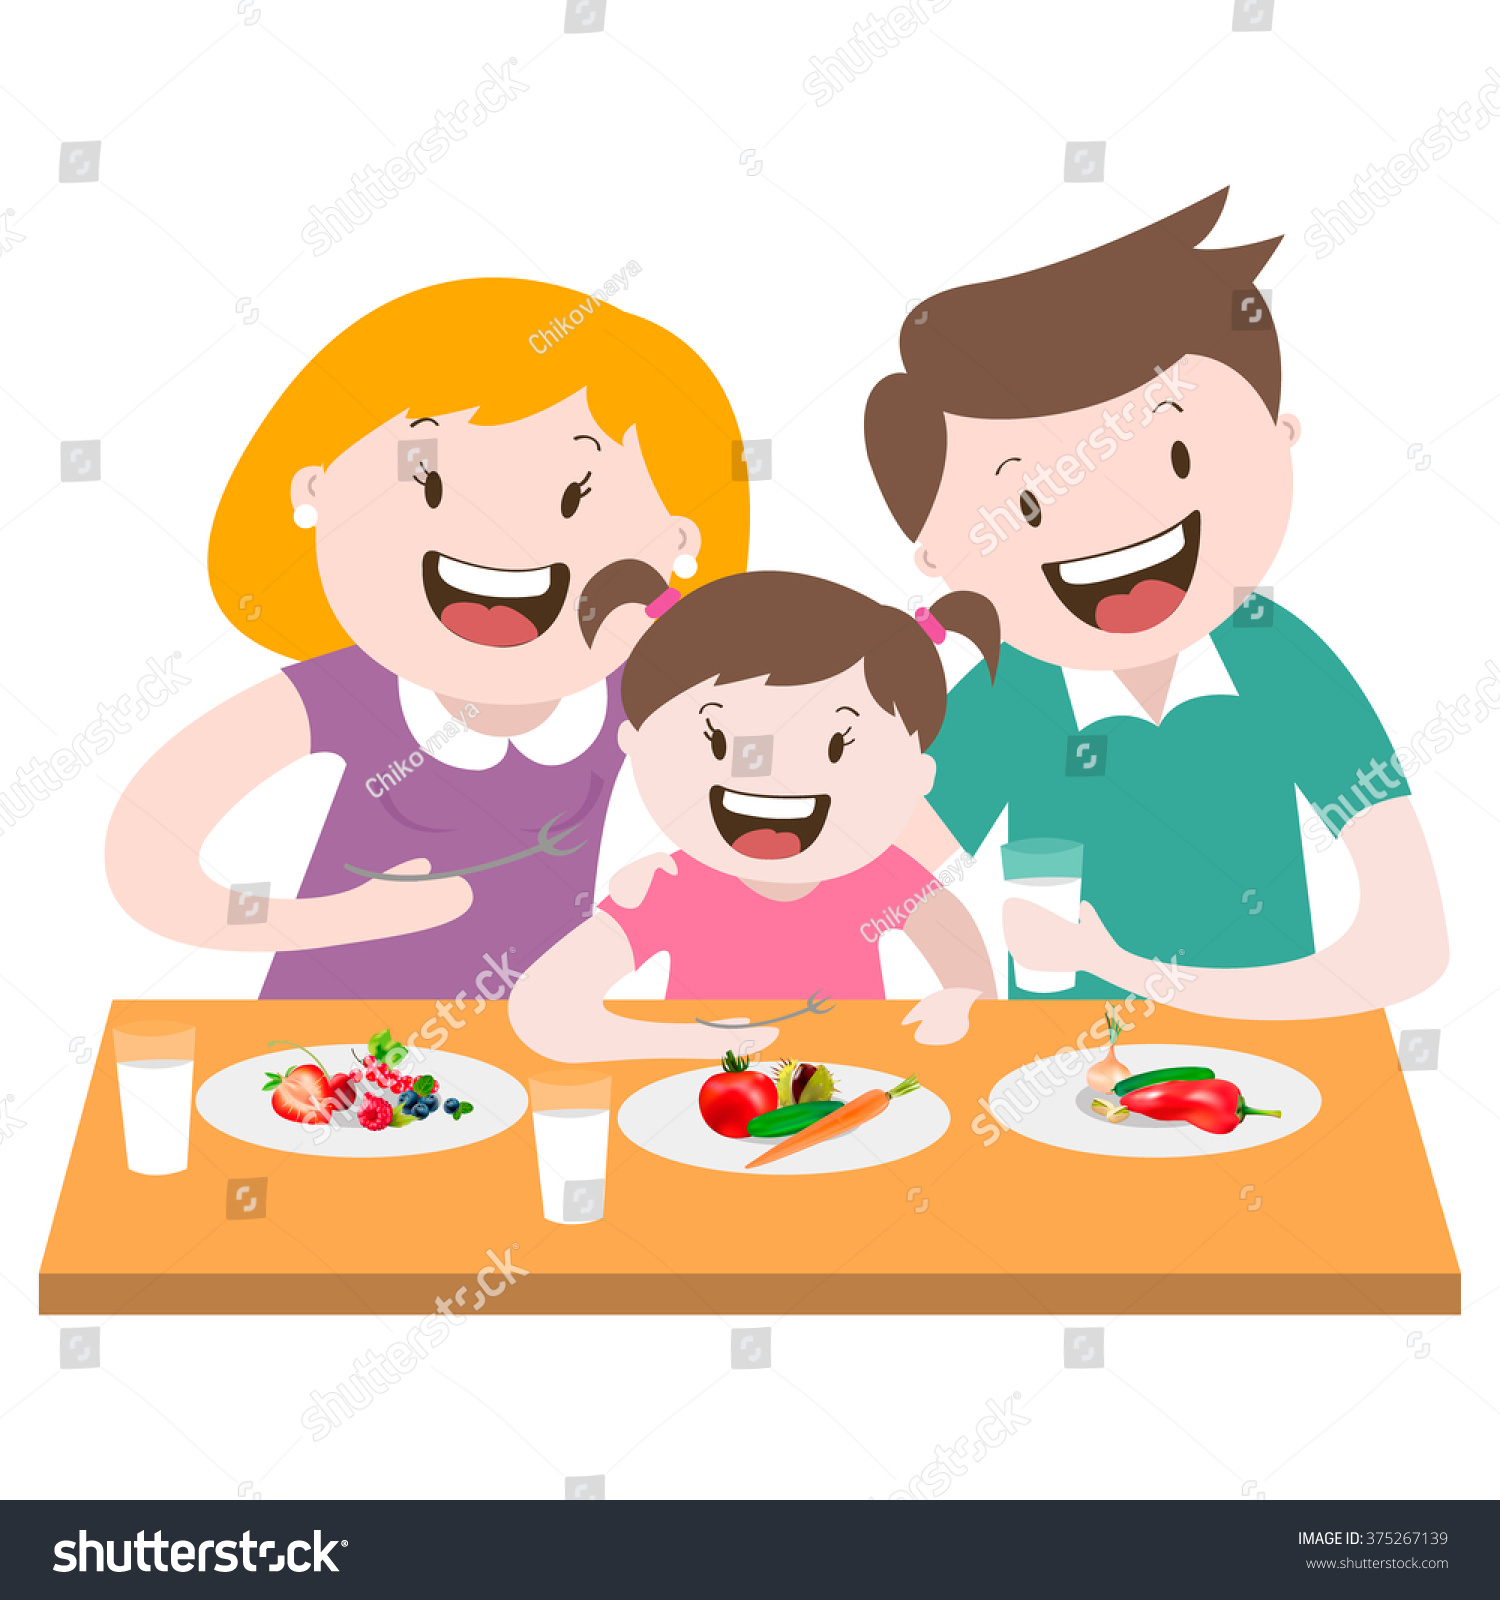 clipart family meal - photo #39